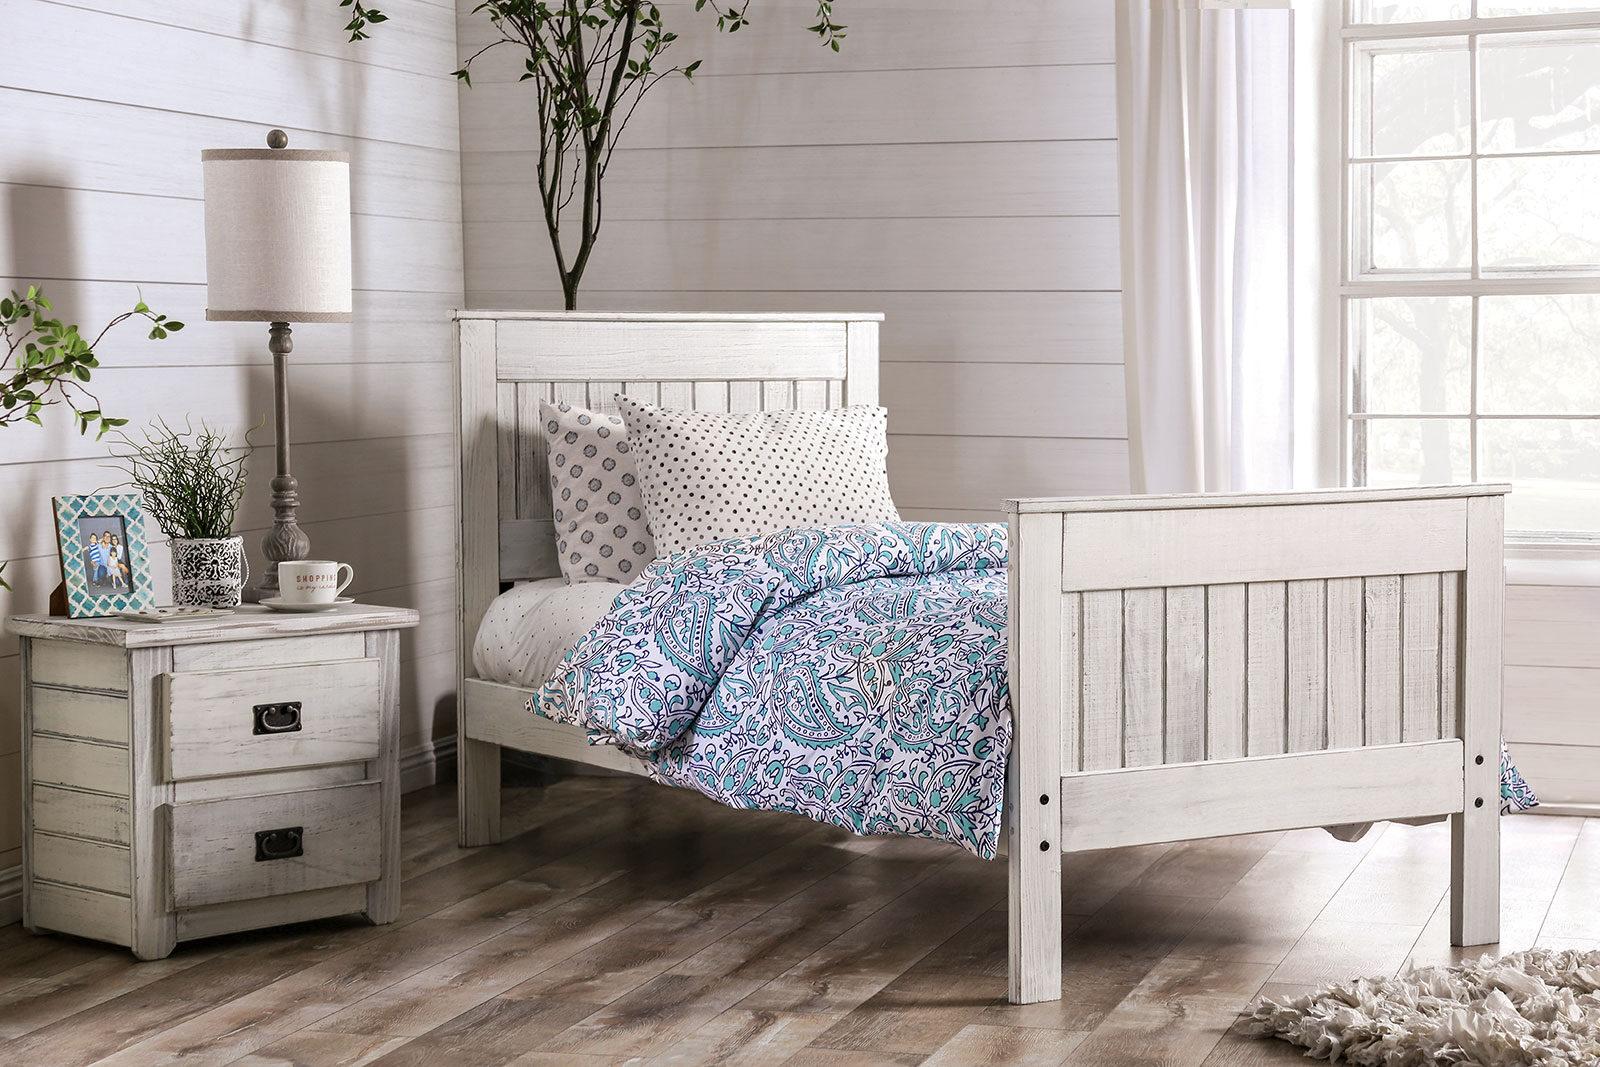 Rustic Panel Bed AM7973WH-T Rockwall AM7973WH-T in White 